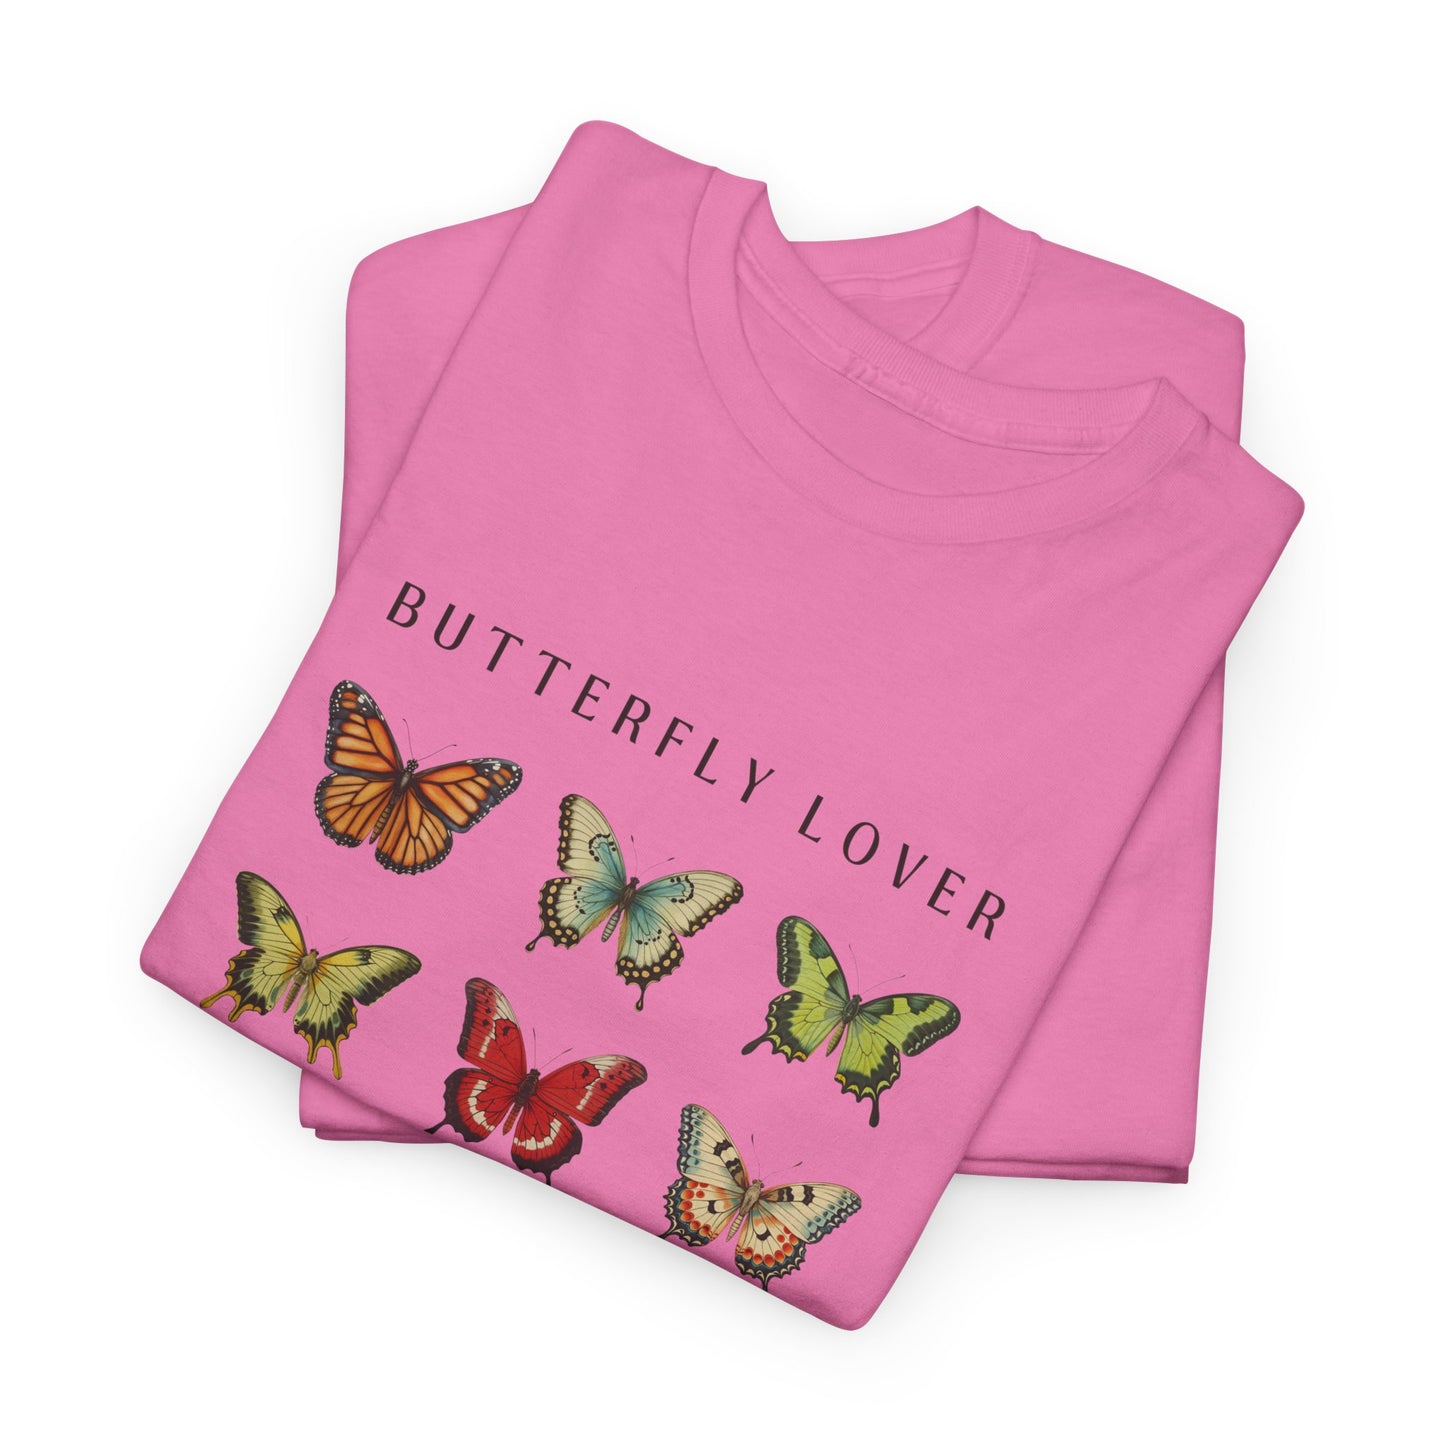 Unisex Heavy Cotton Graphic design (Butterfly Lover) T-shirt